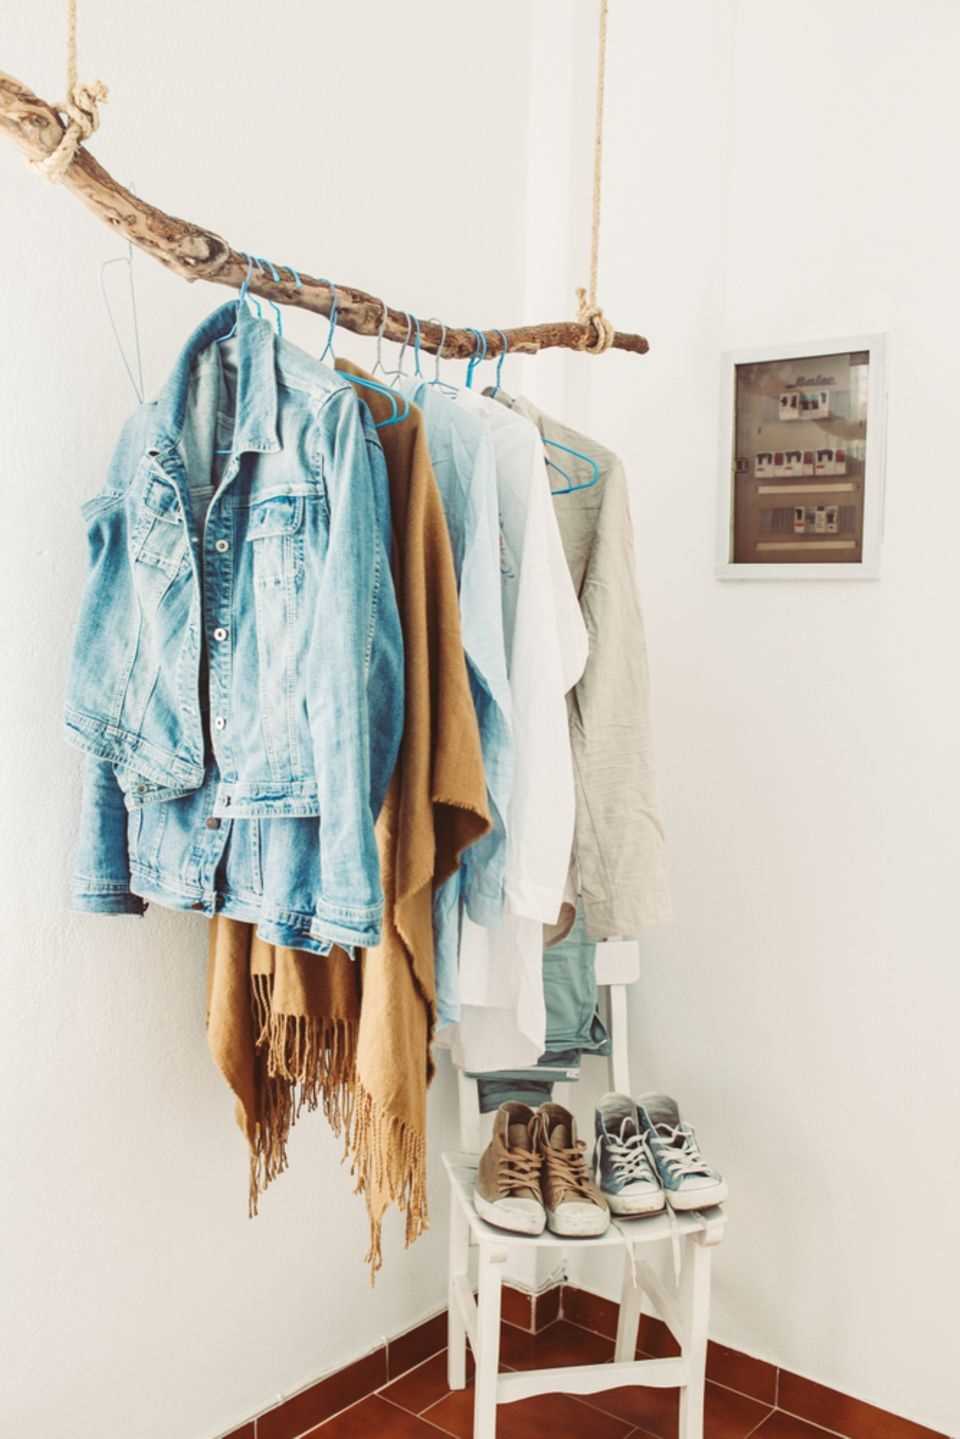 Store worn clothing: clothes rail made from a tree trunk